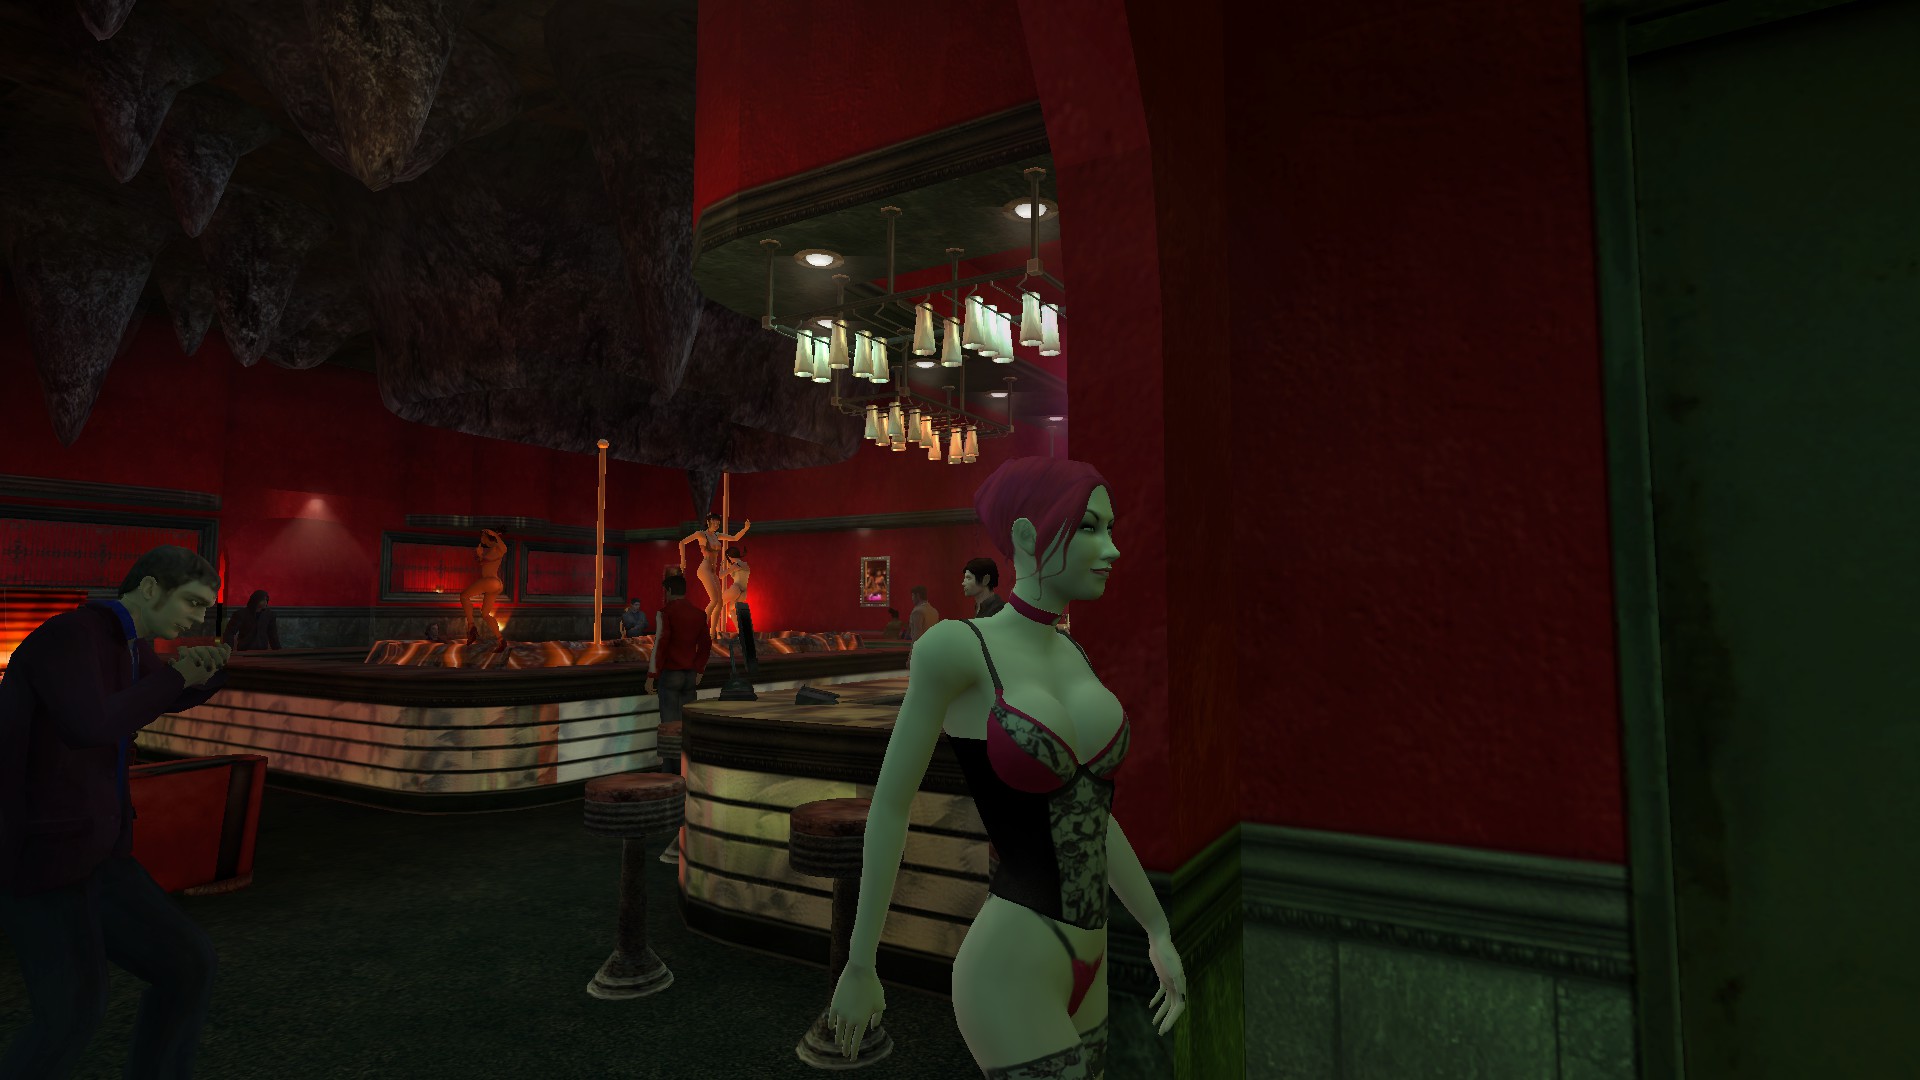 Jeanette skin for PC addon - Vampire: The Masquerade – Bloodlines - ModDB